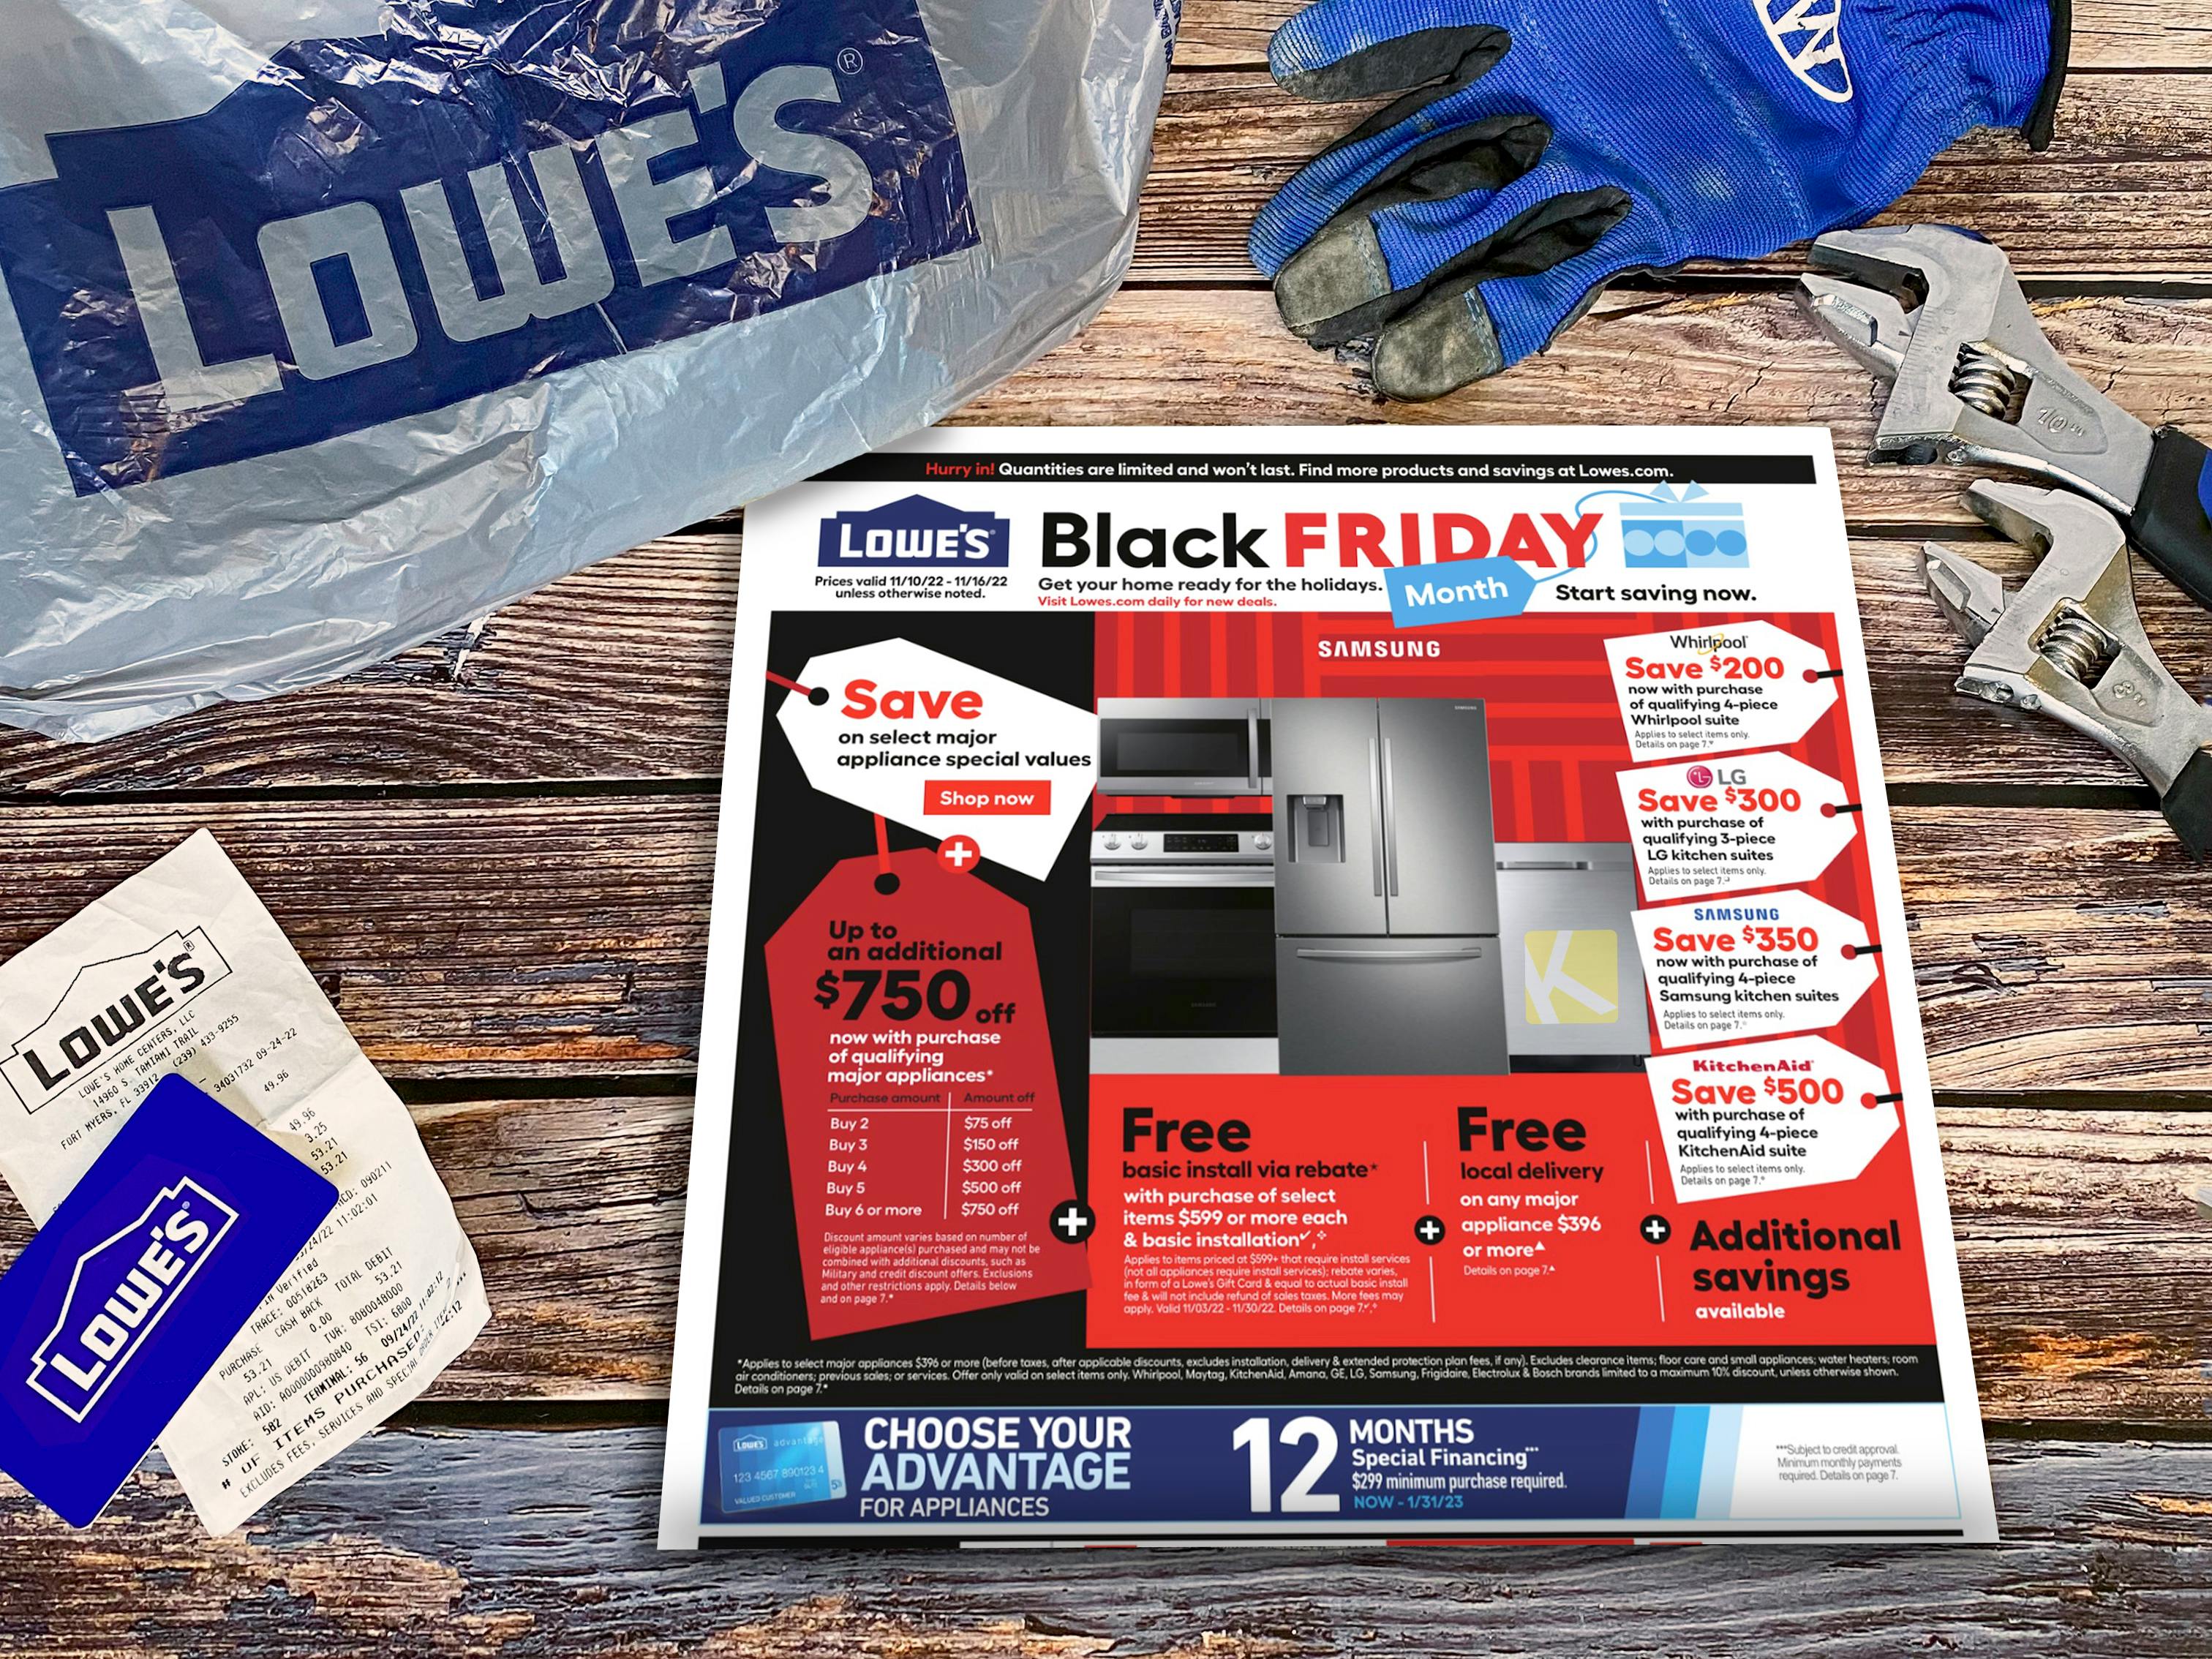 The Lowe's 2022 Black Friday advertisement on a table with a Lowe's bag, gift card, receipt, and some tools.